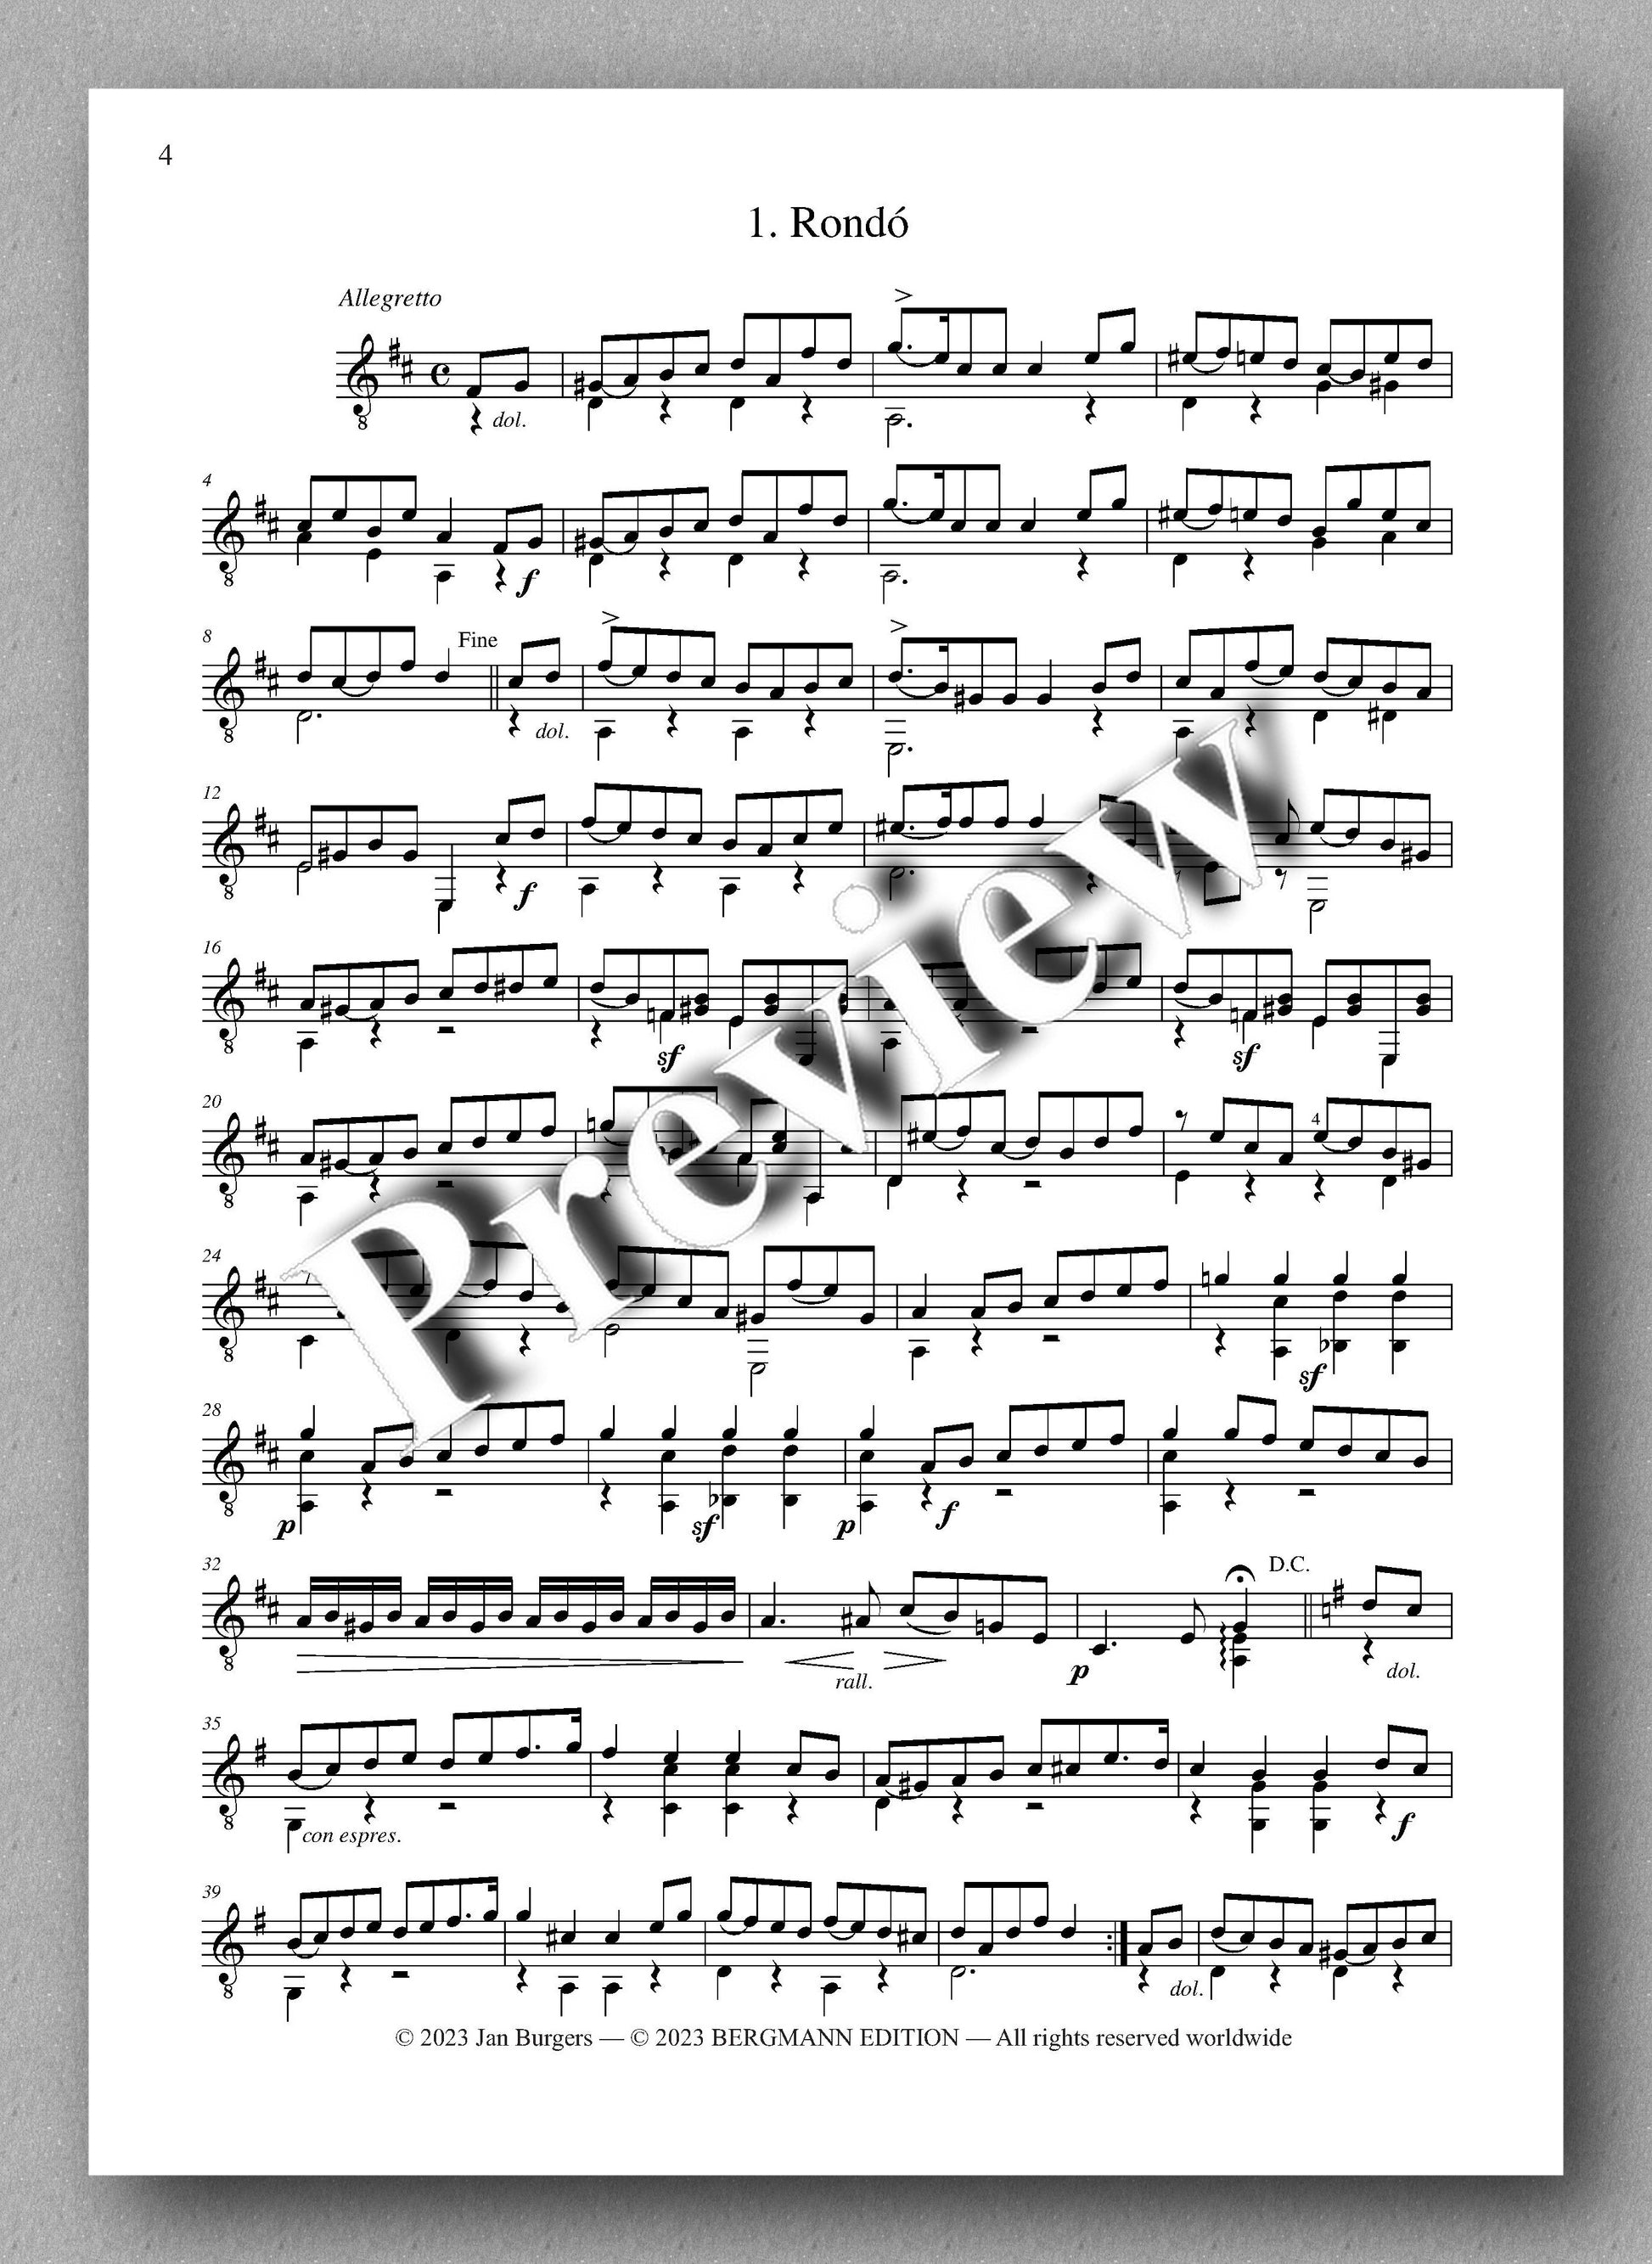 Molino, Collected Works for Guitar Solo, Vol. 45 - preview of the music score 1